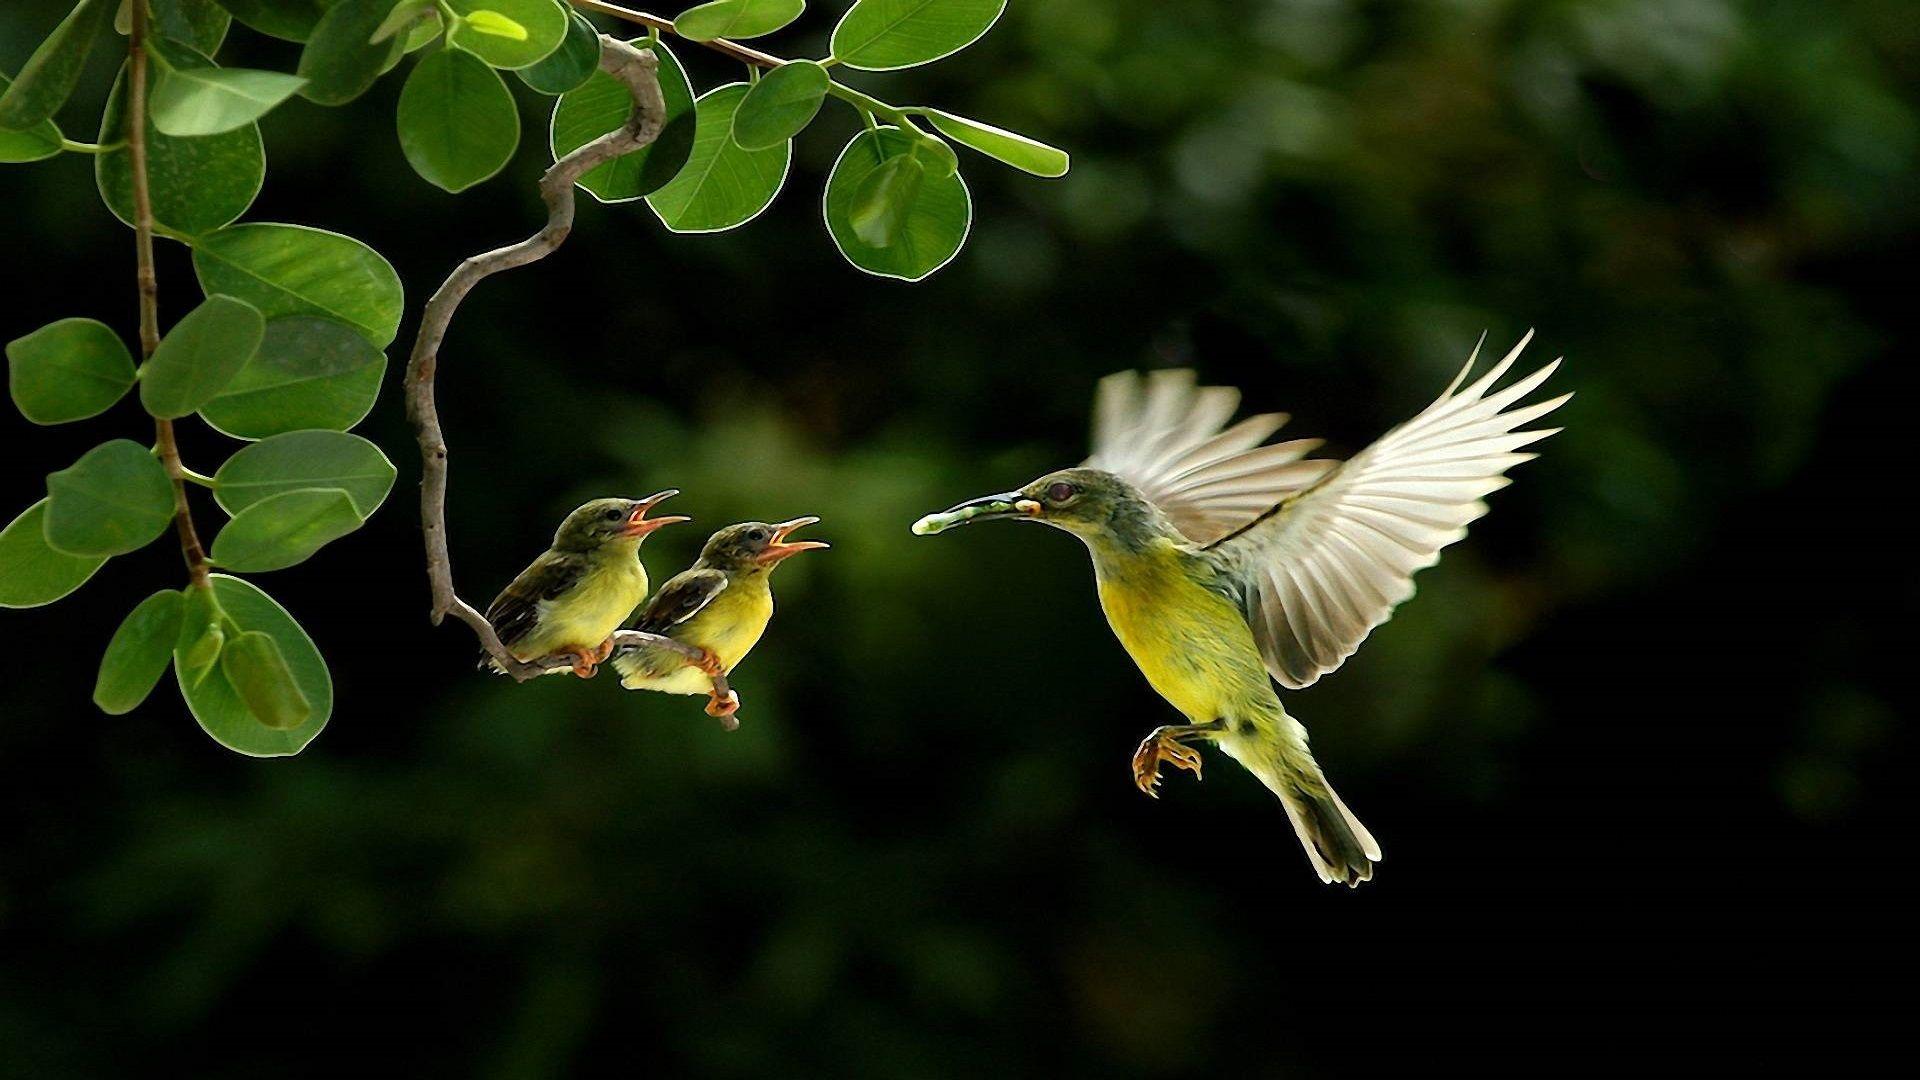 Picturesque and colorful birds in a tree branch 2K wallpaper download